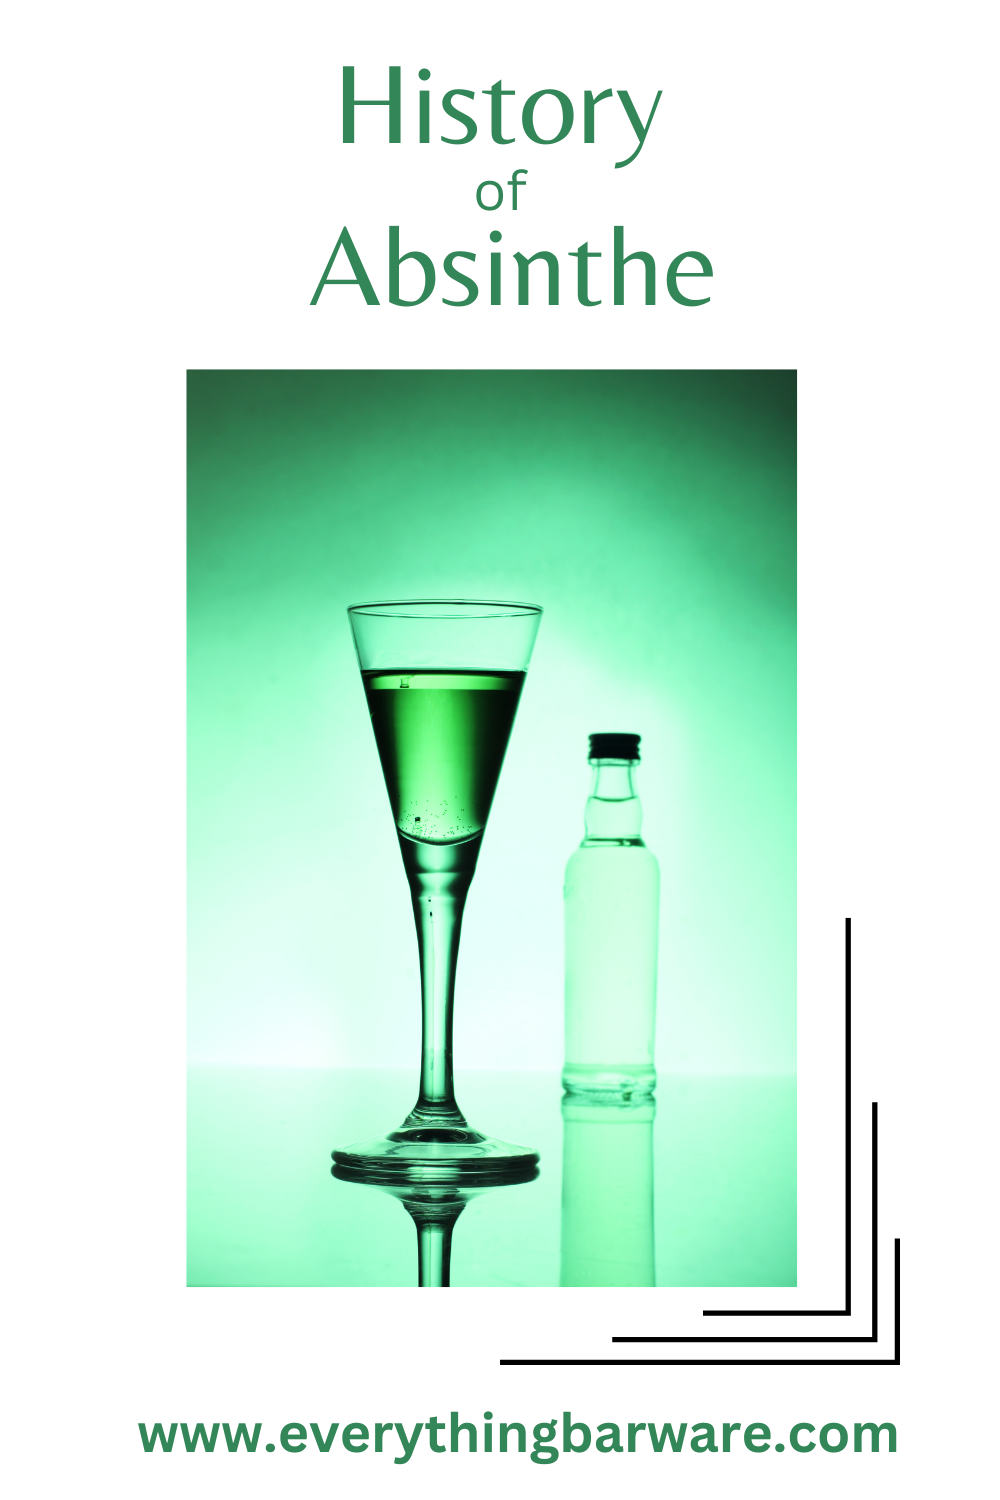 The History of Absinthe and the Absinthe Spoon